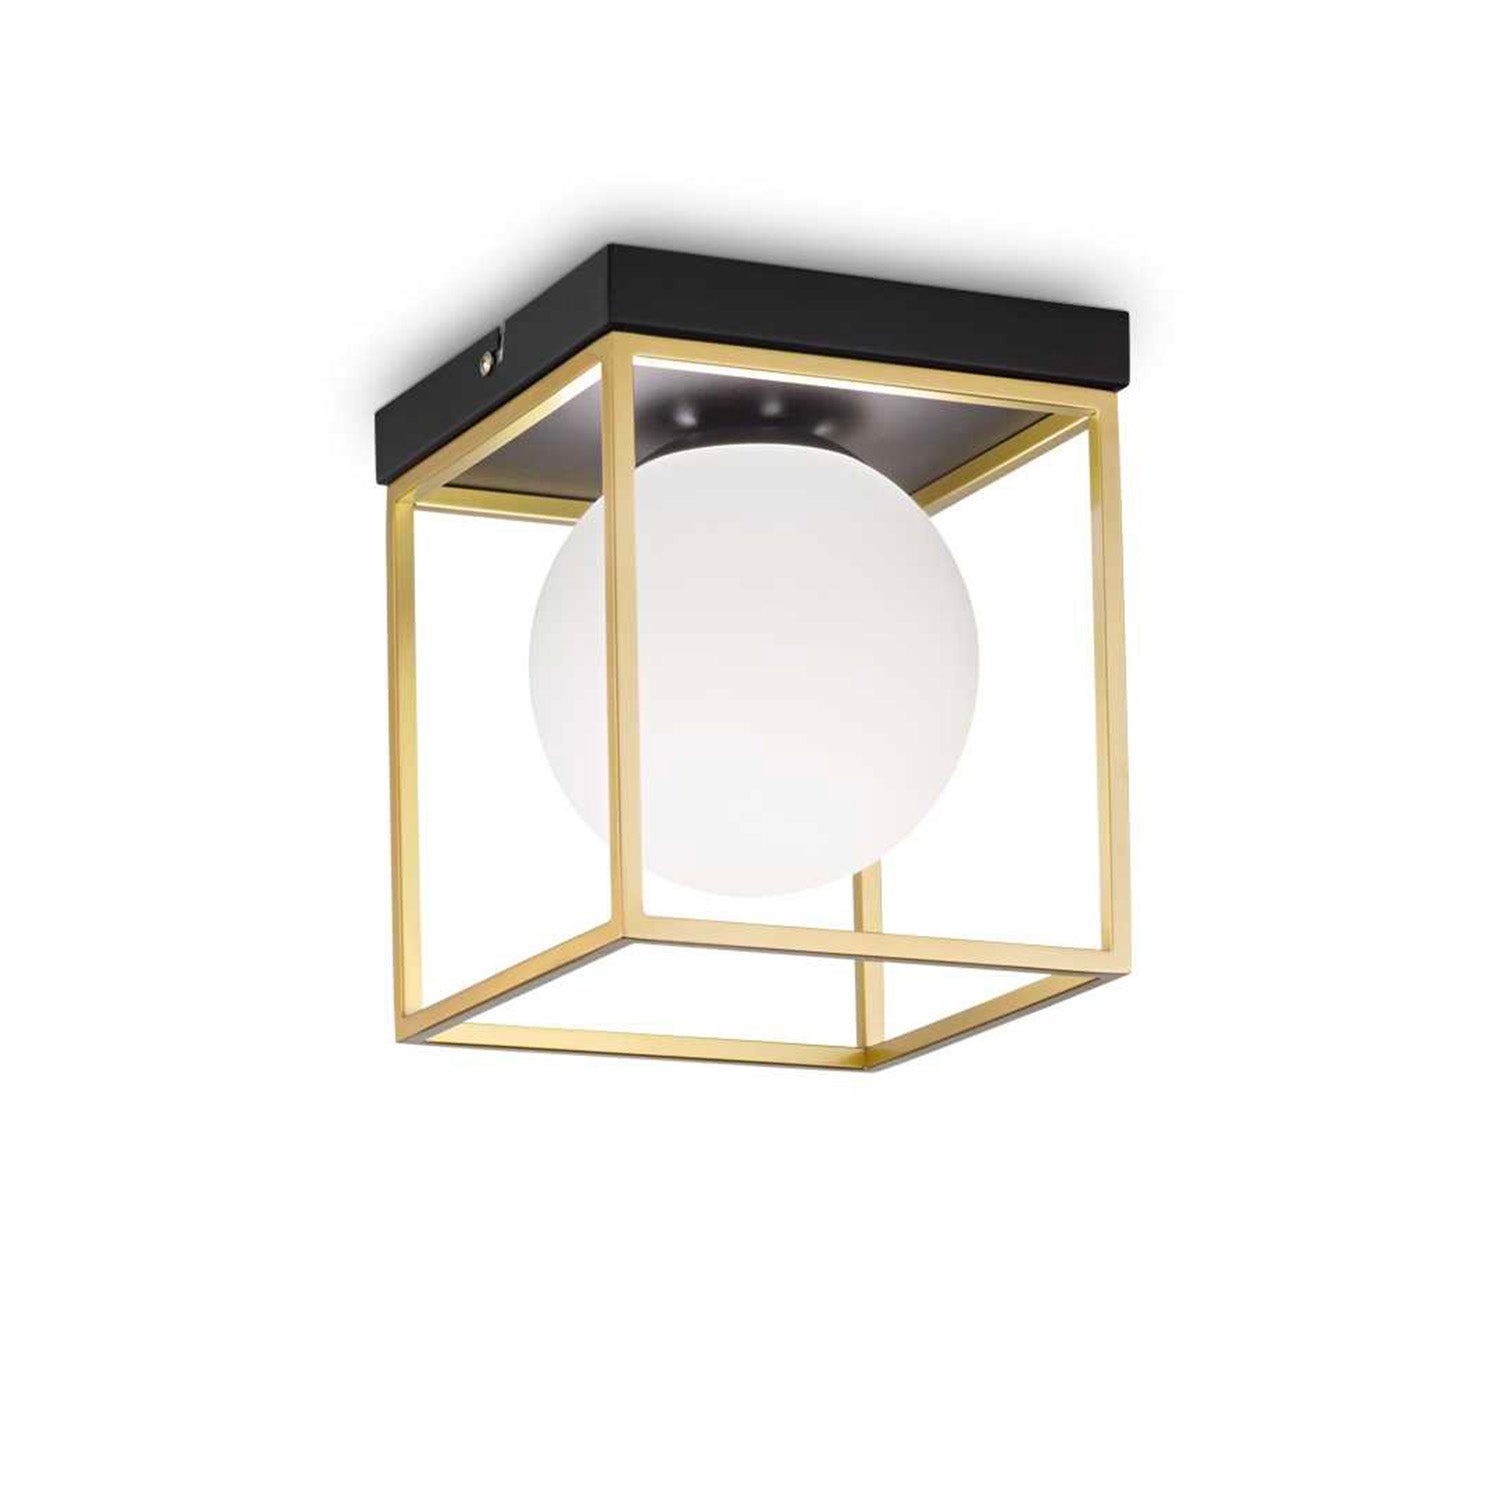 LINGOTTO - Cube ceiling light with glass ball